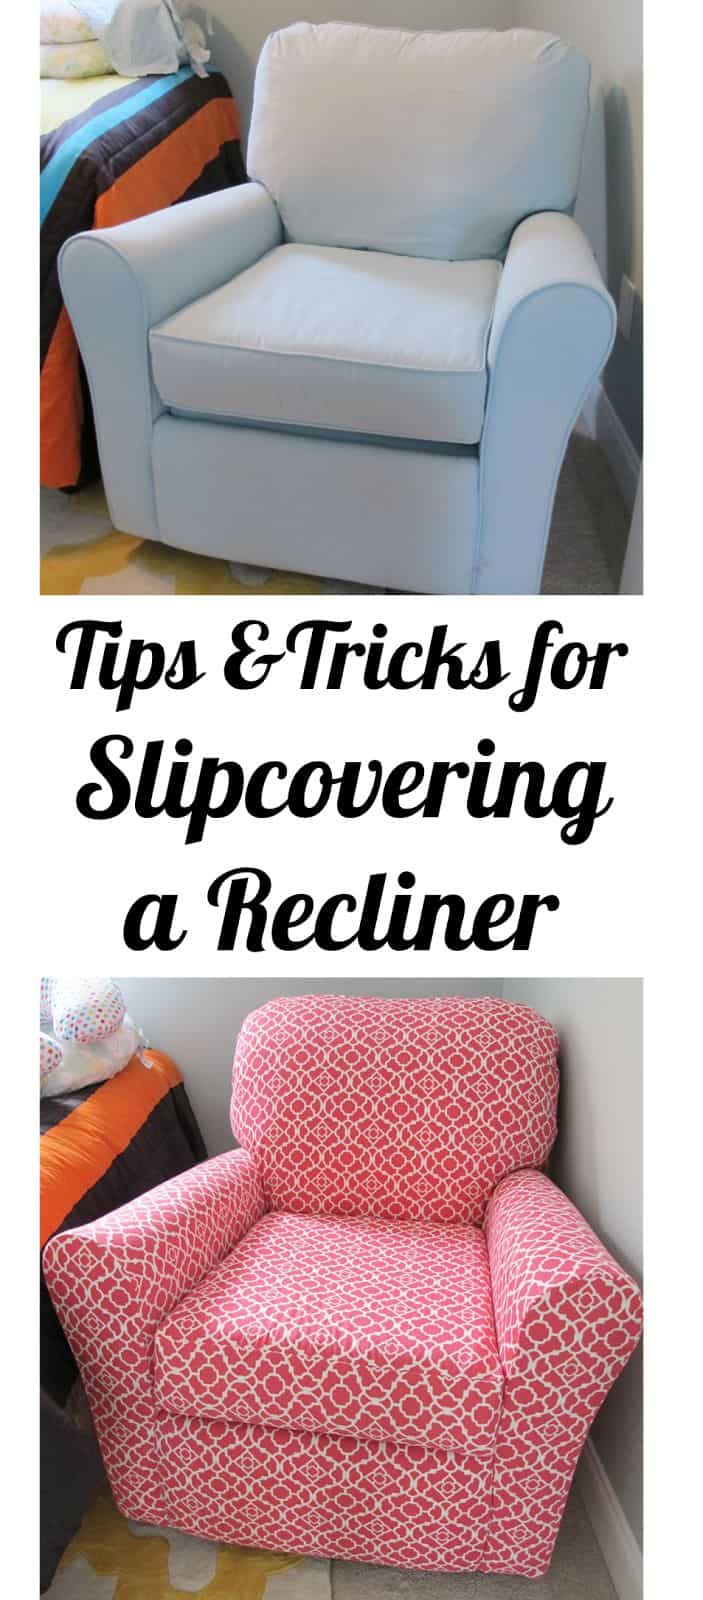 #12 an example of a slipcover reupholstering idea